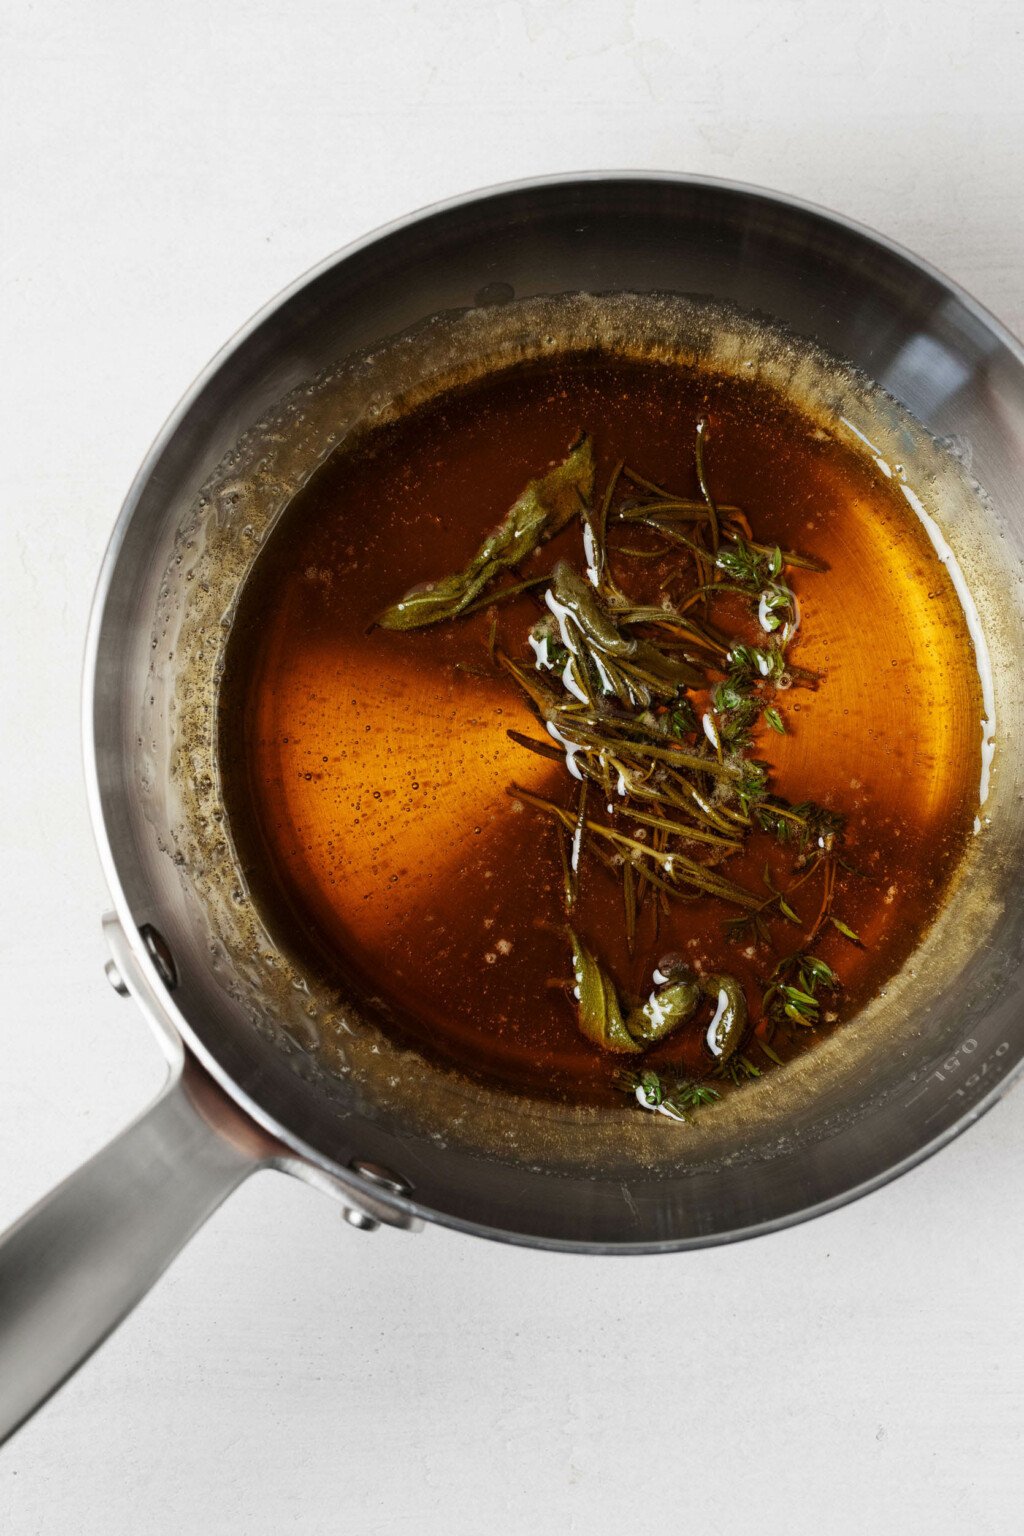 A small, metal saucepan holds warm syrup that's been infused with herbs.